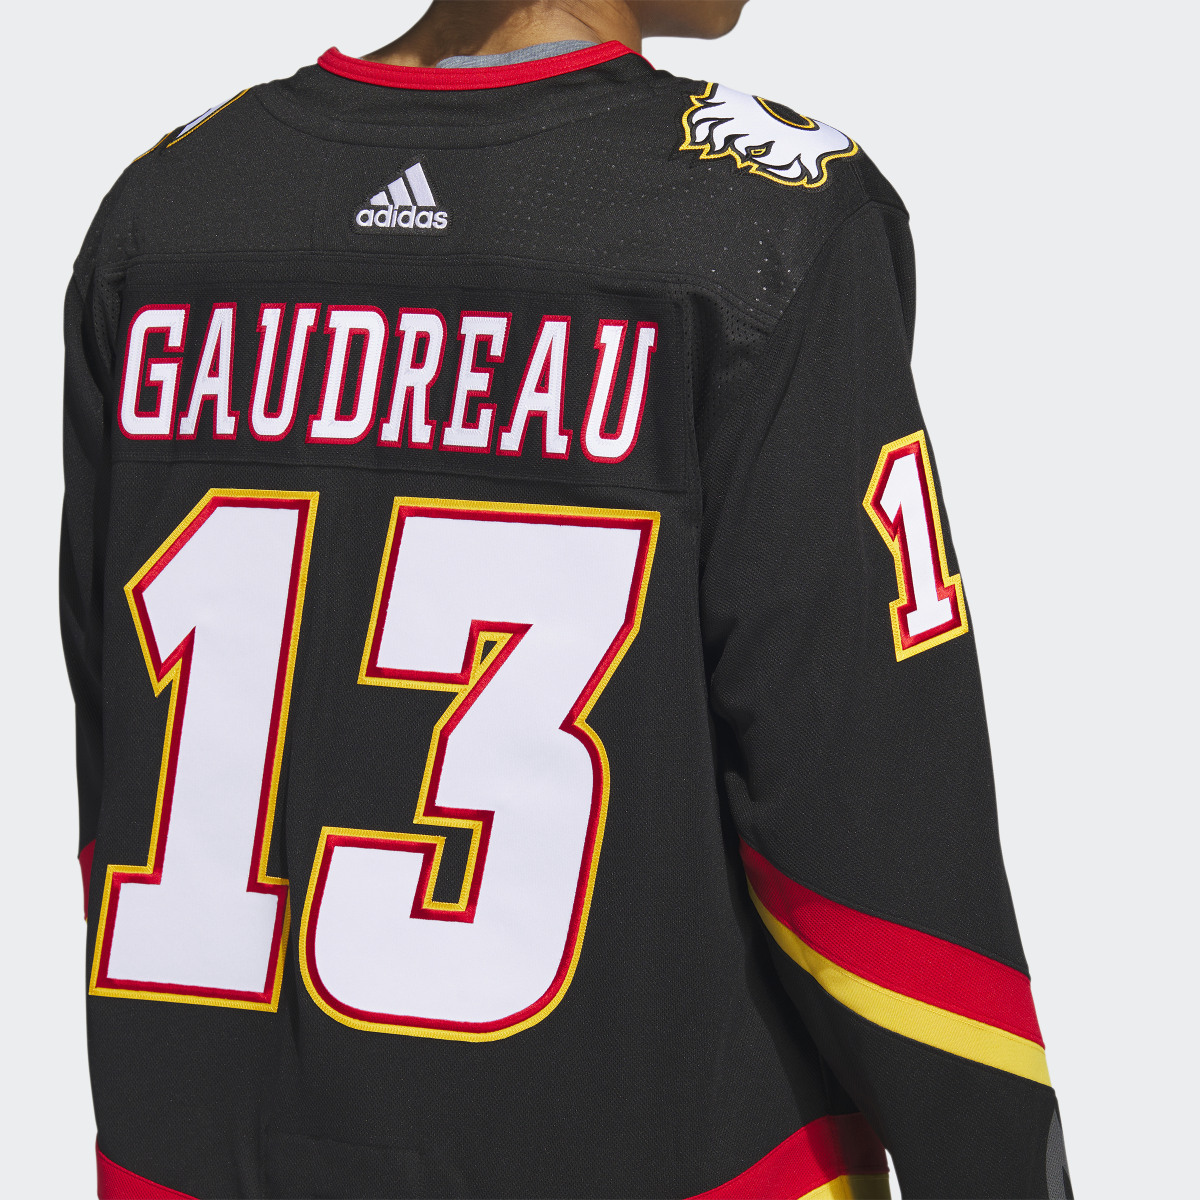 Adidas Flames Gaudreau Third Authentic Jersey. 8